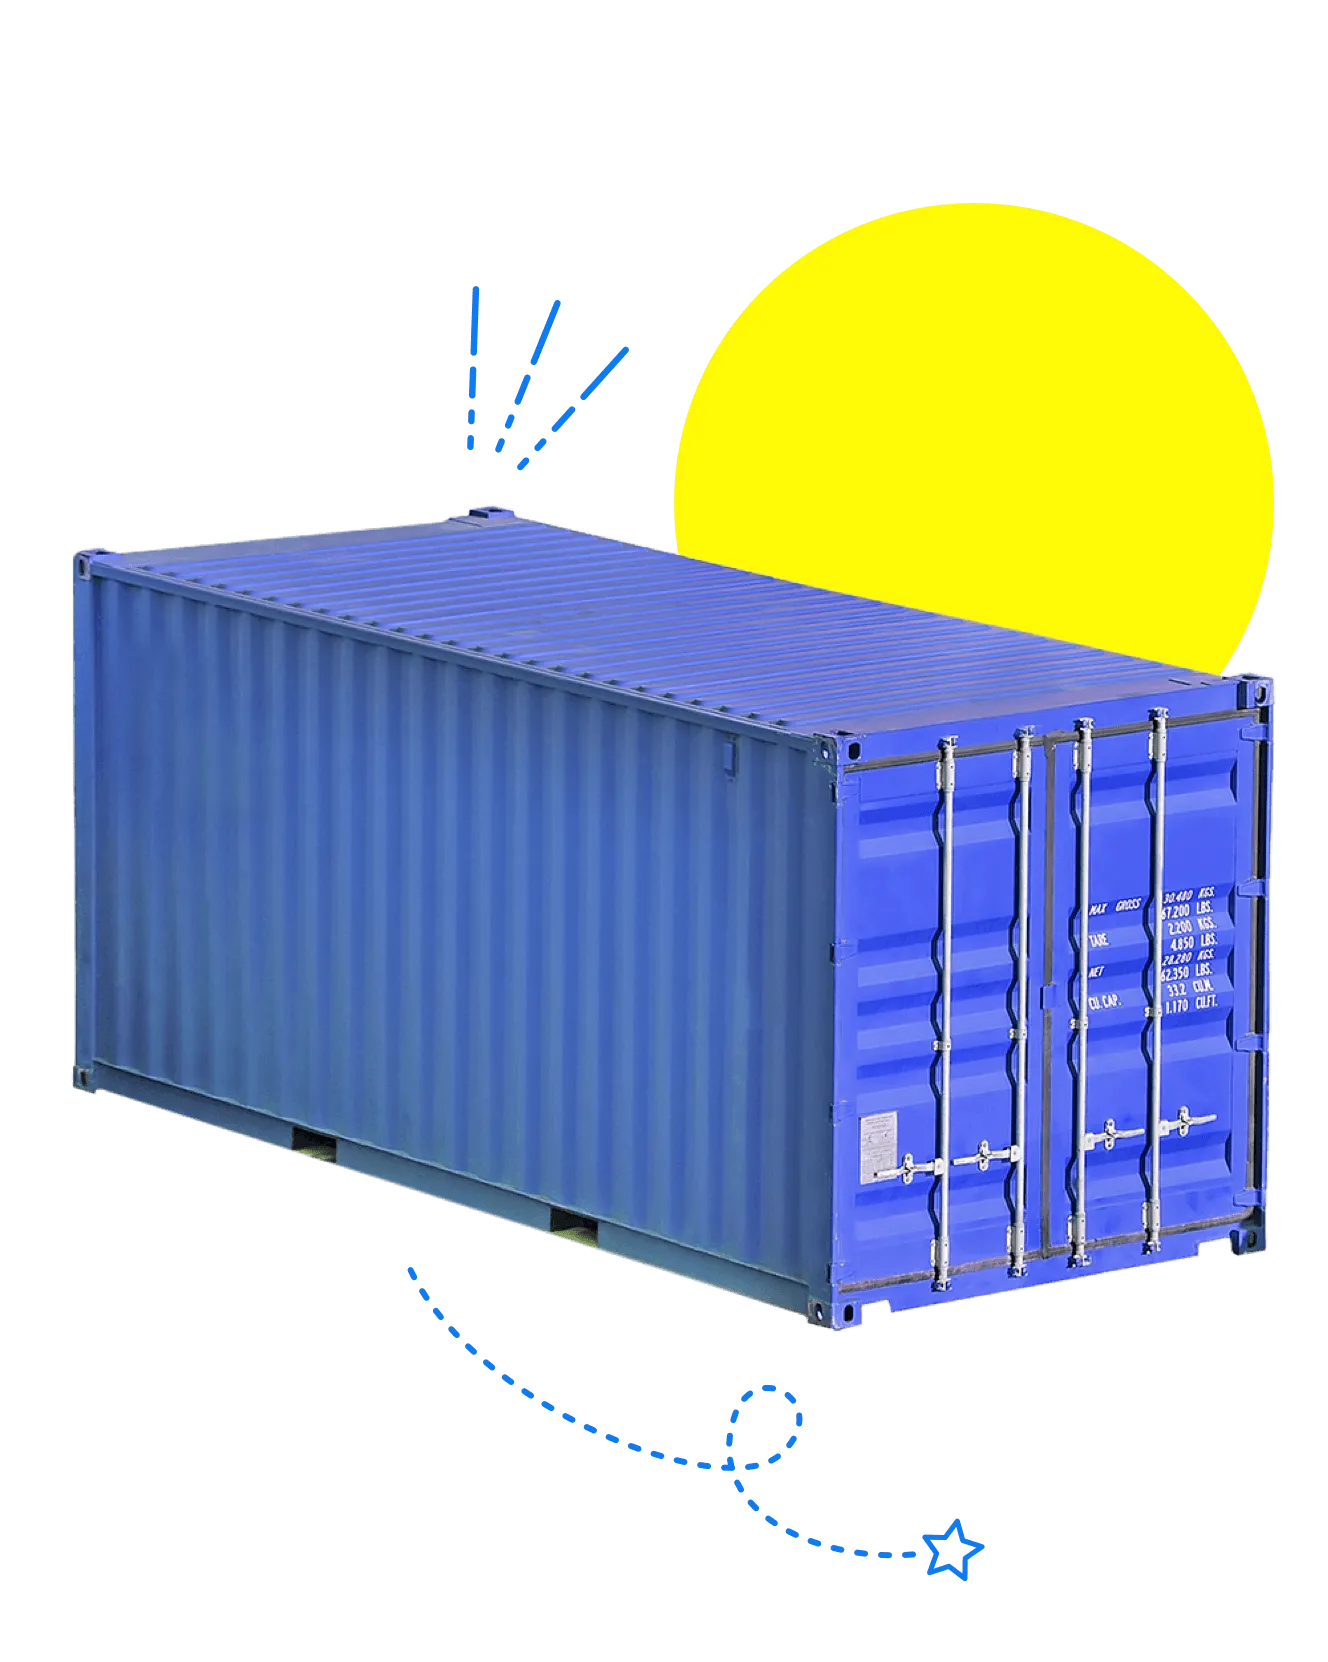 Moving Containers Case Study